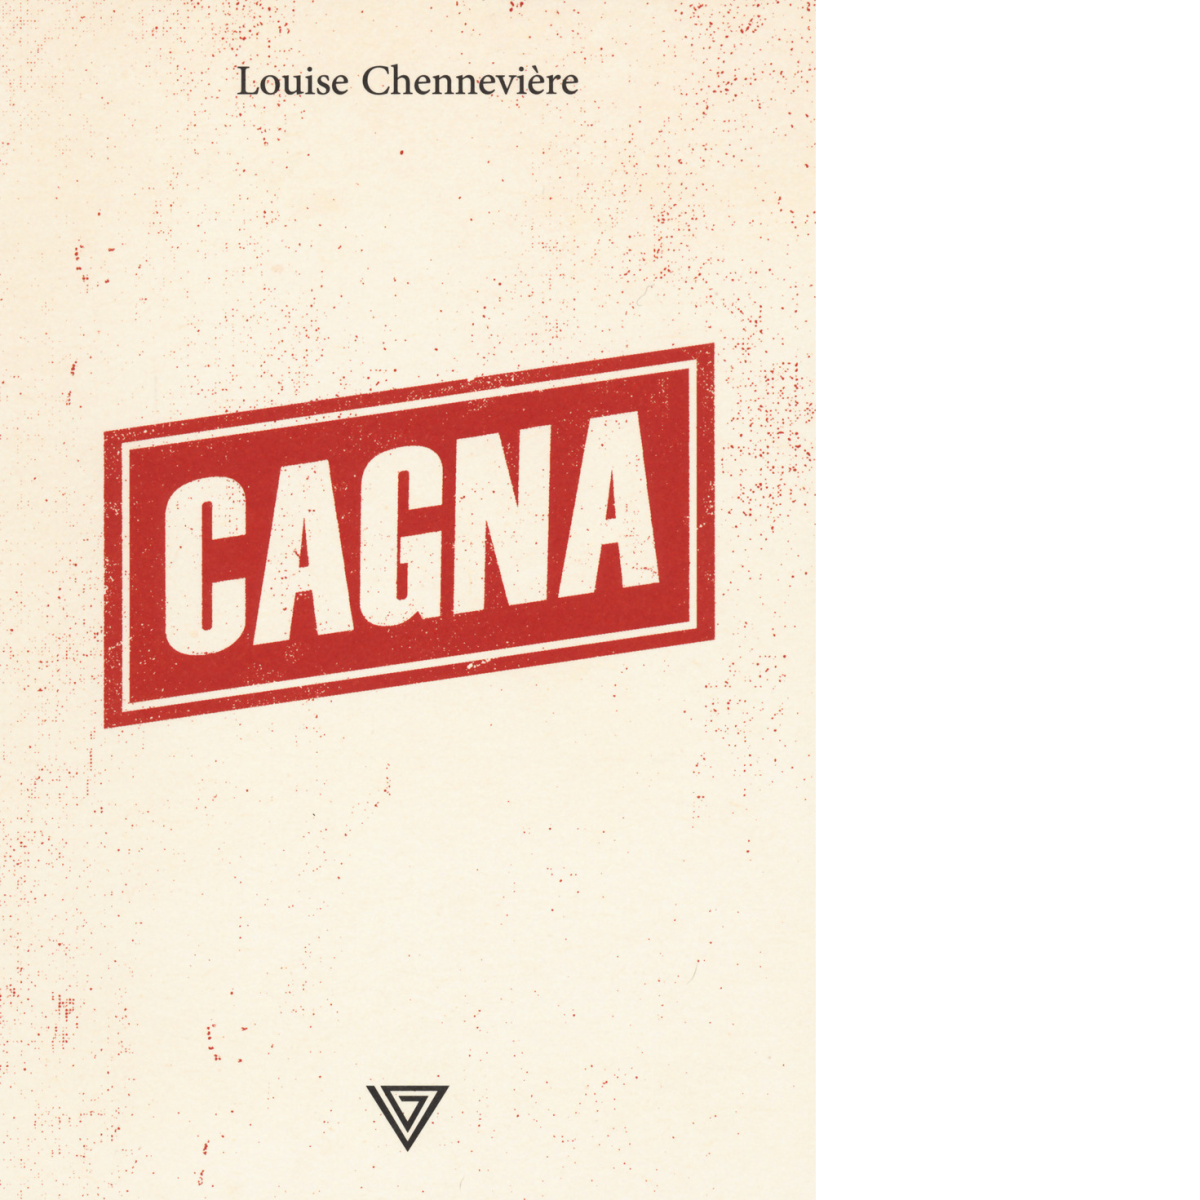 Cagna - Chenneviere Louise - Perrone, 2020